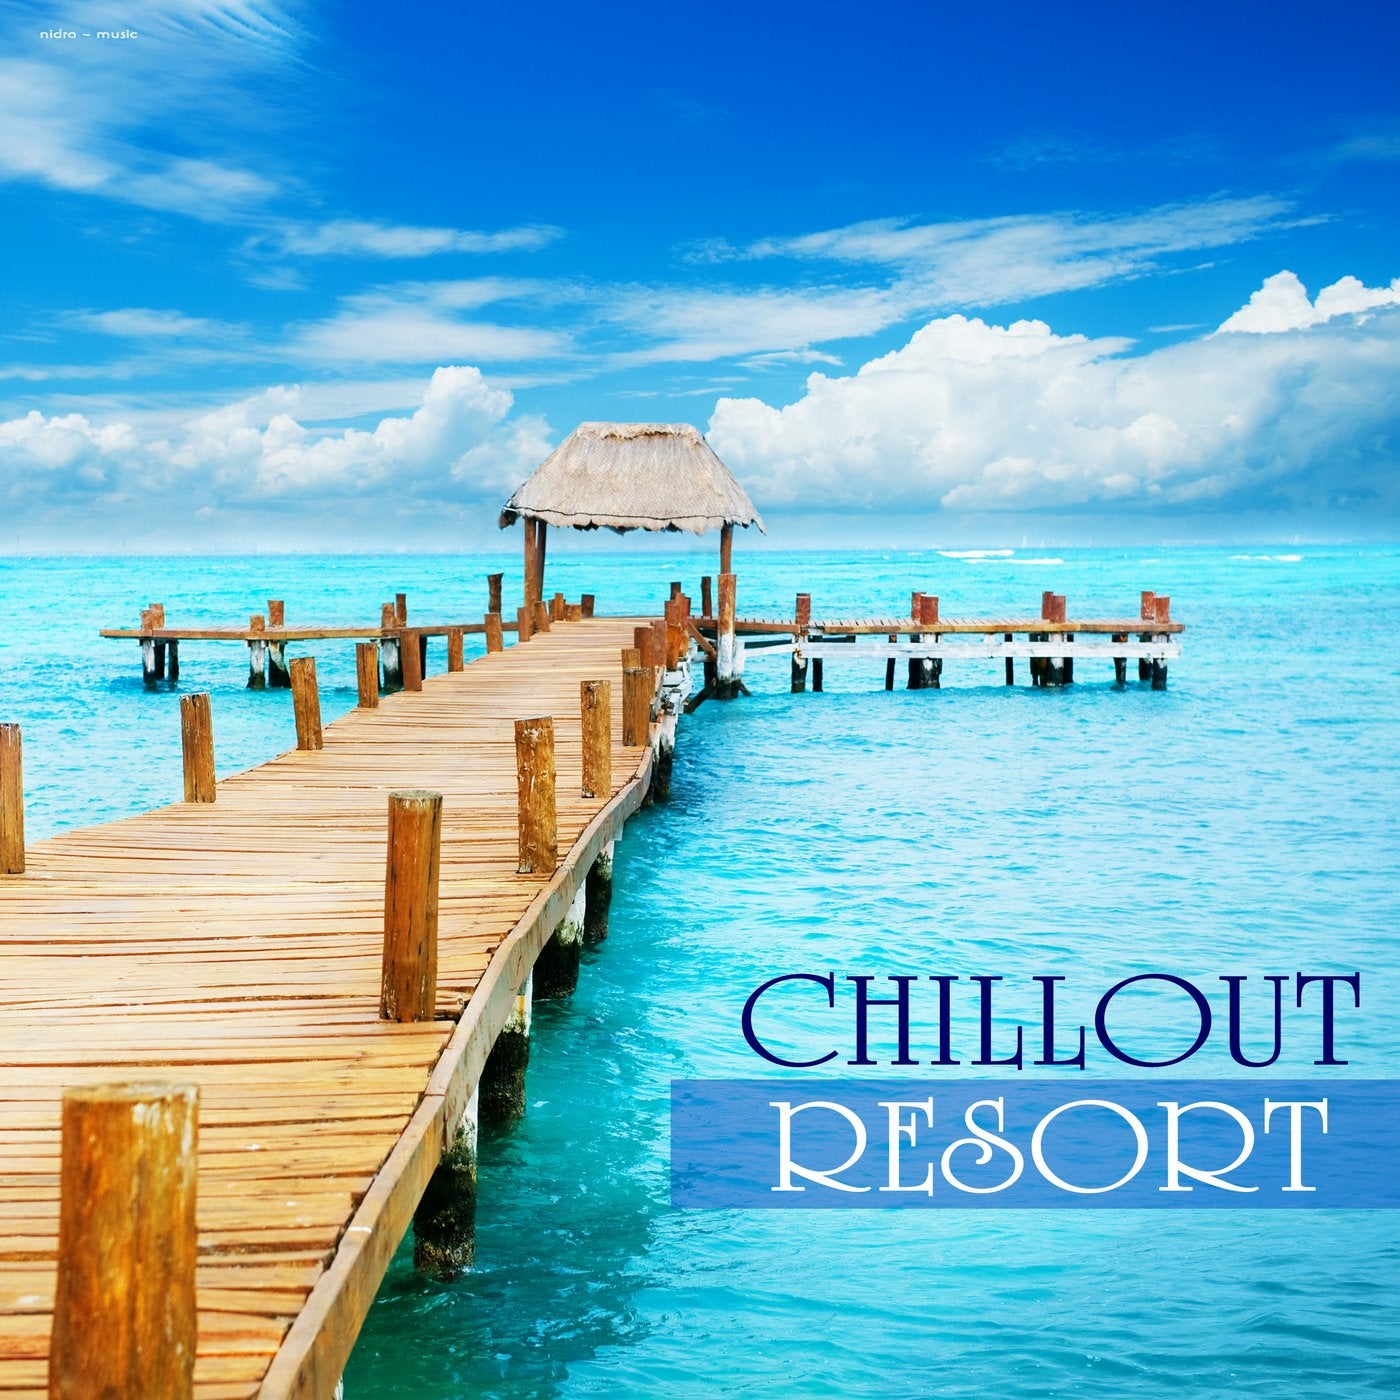 Chillout Resort